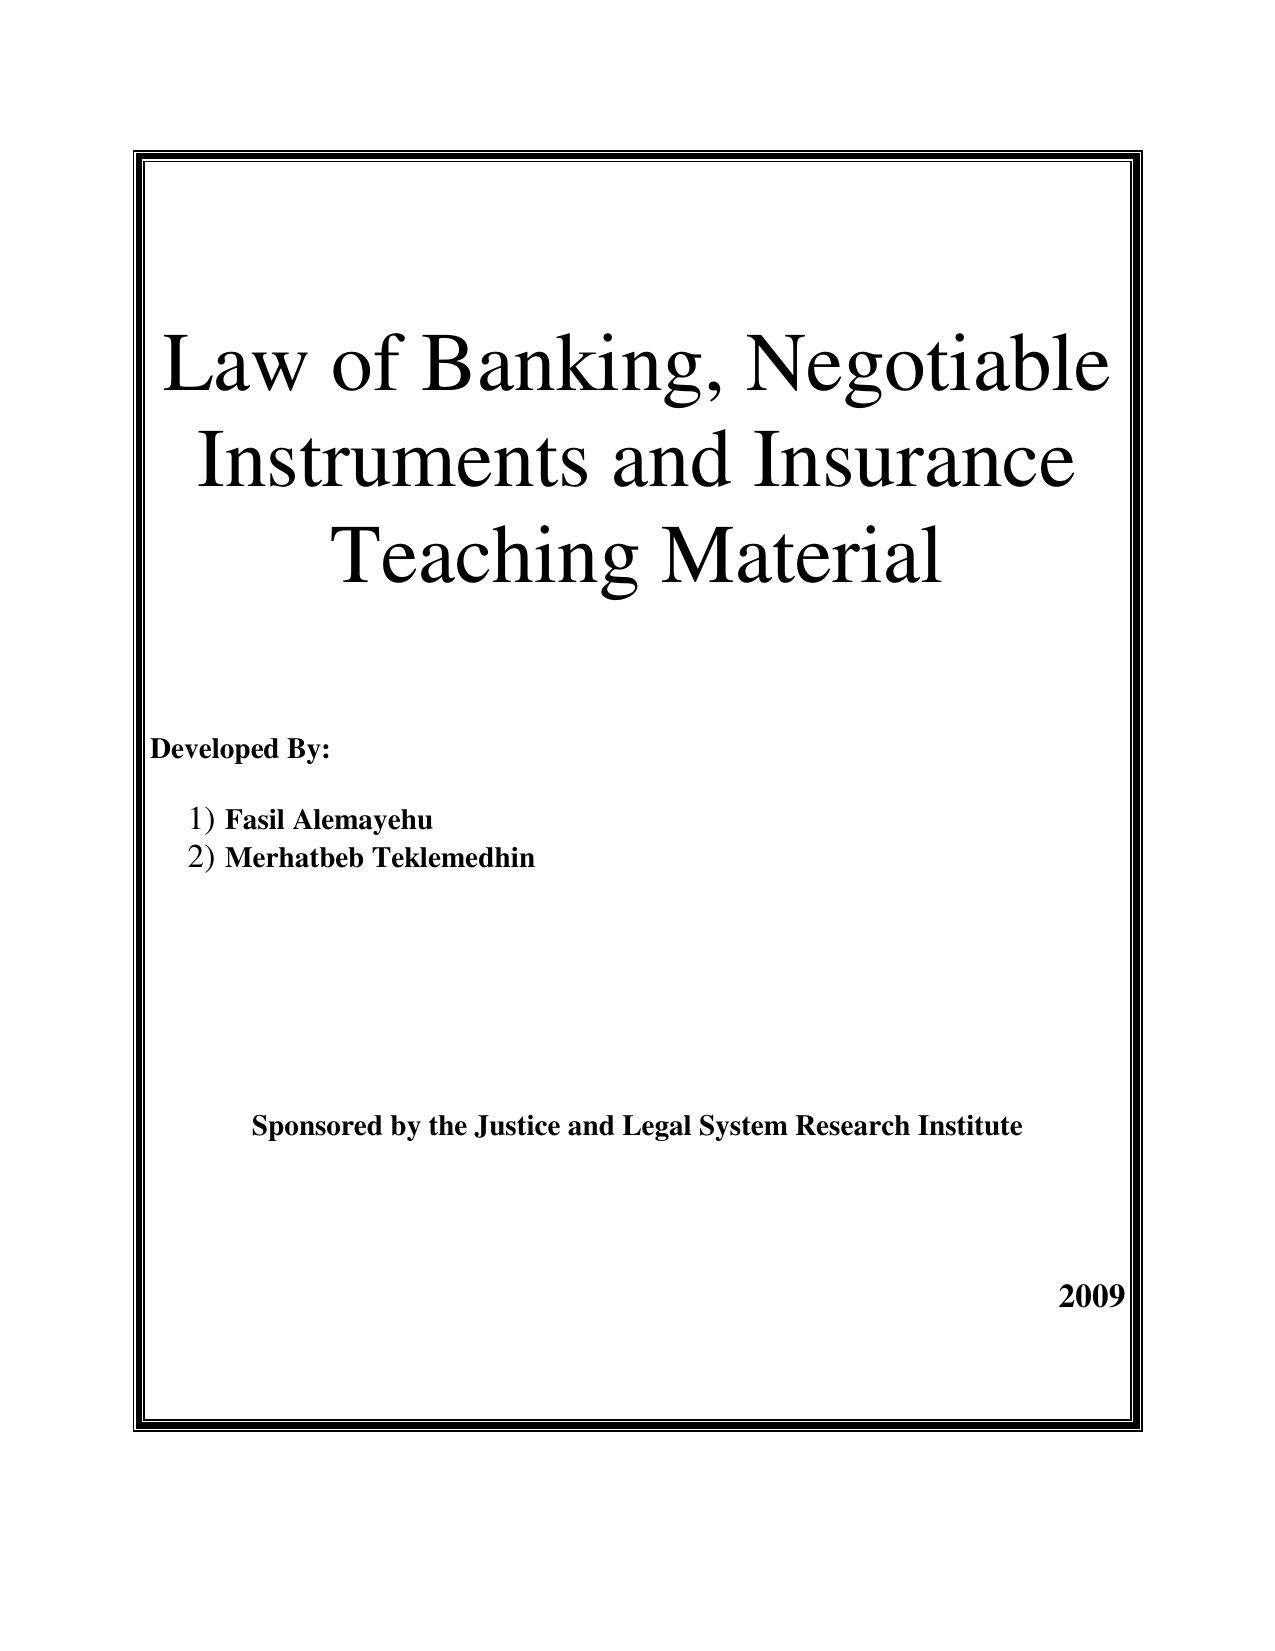 Law of Banking, Negotiable Instruments and Insurance